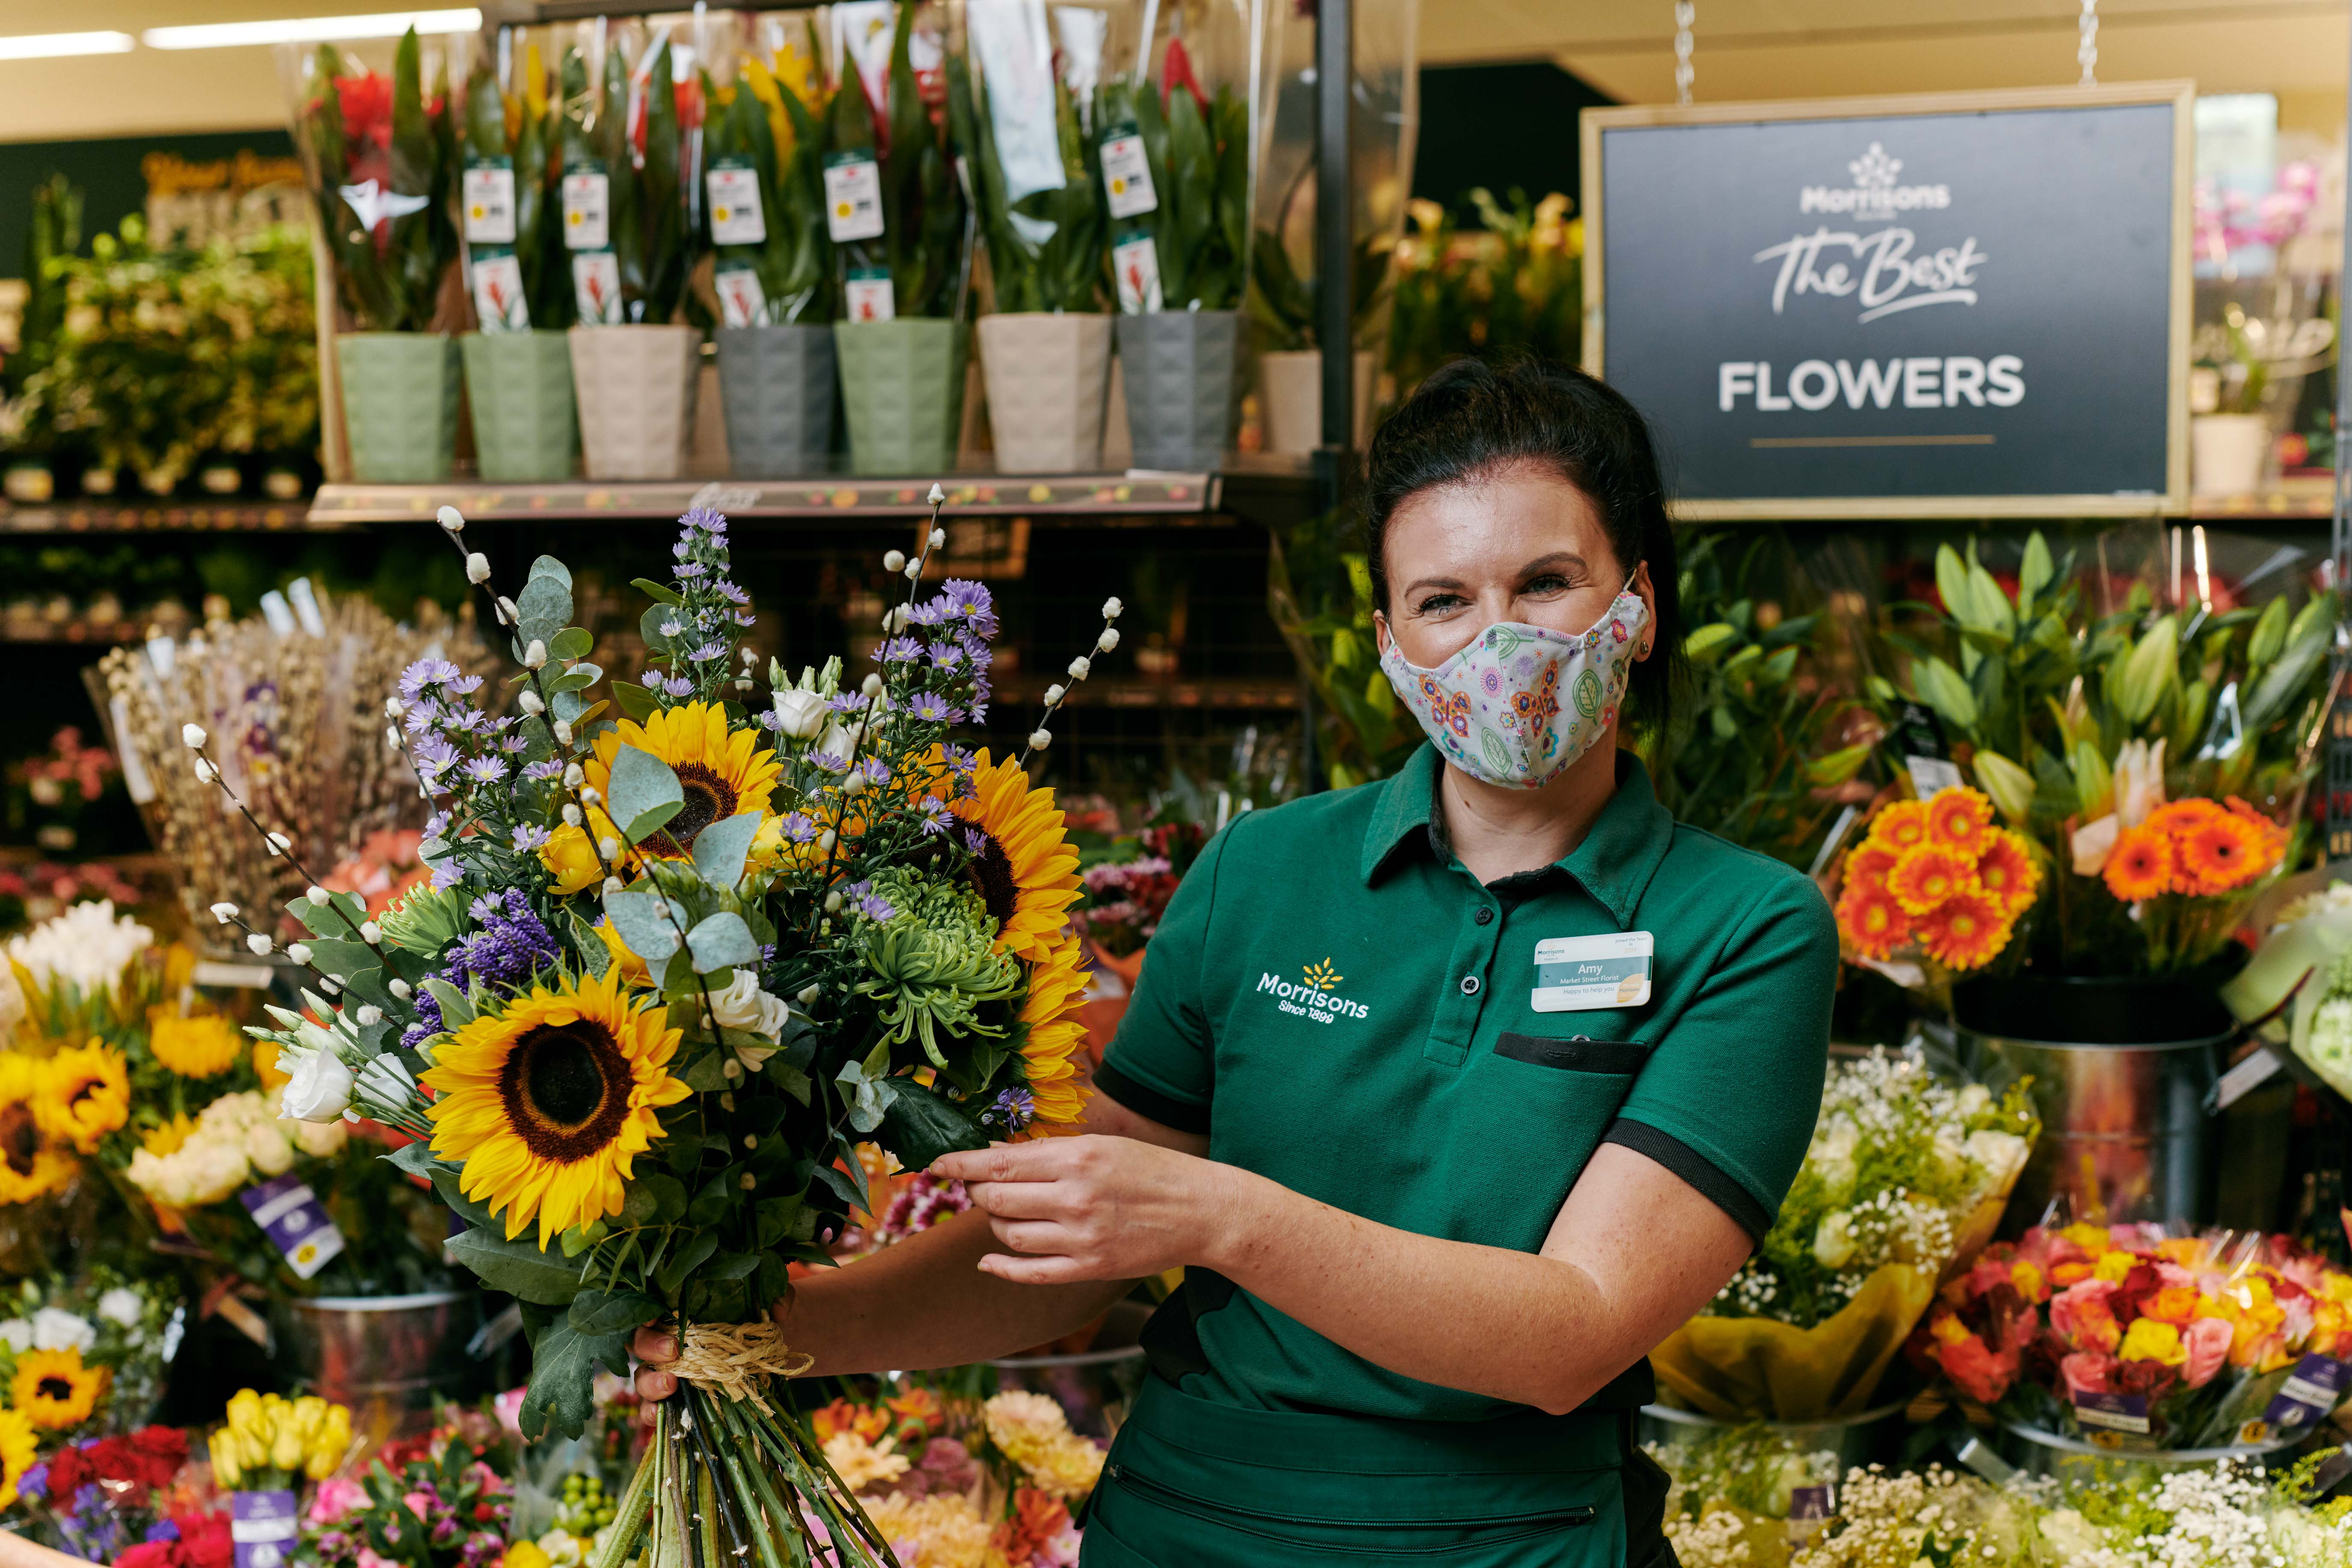 Morrisons doubles number of professional florists in its stores